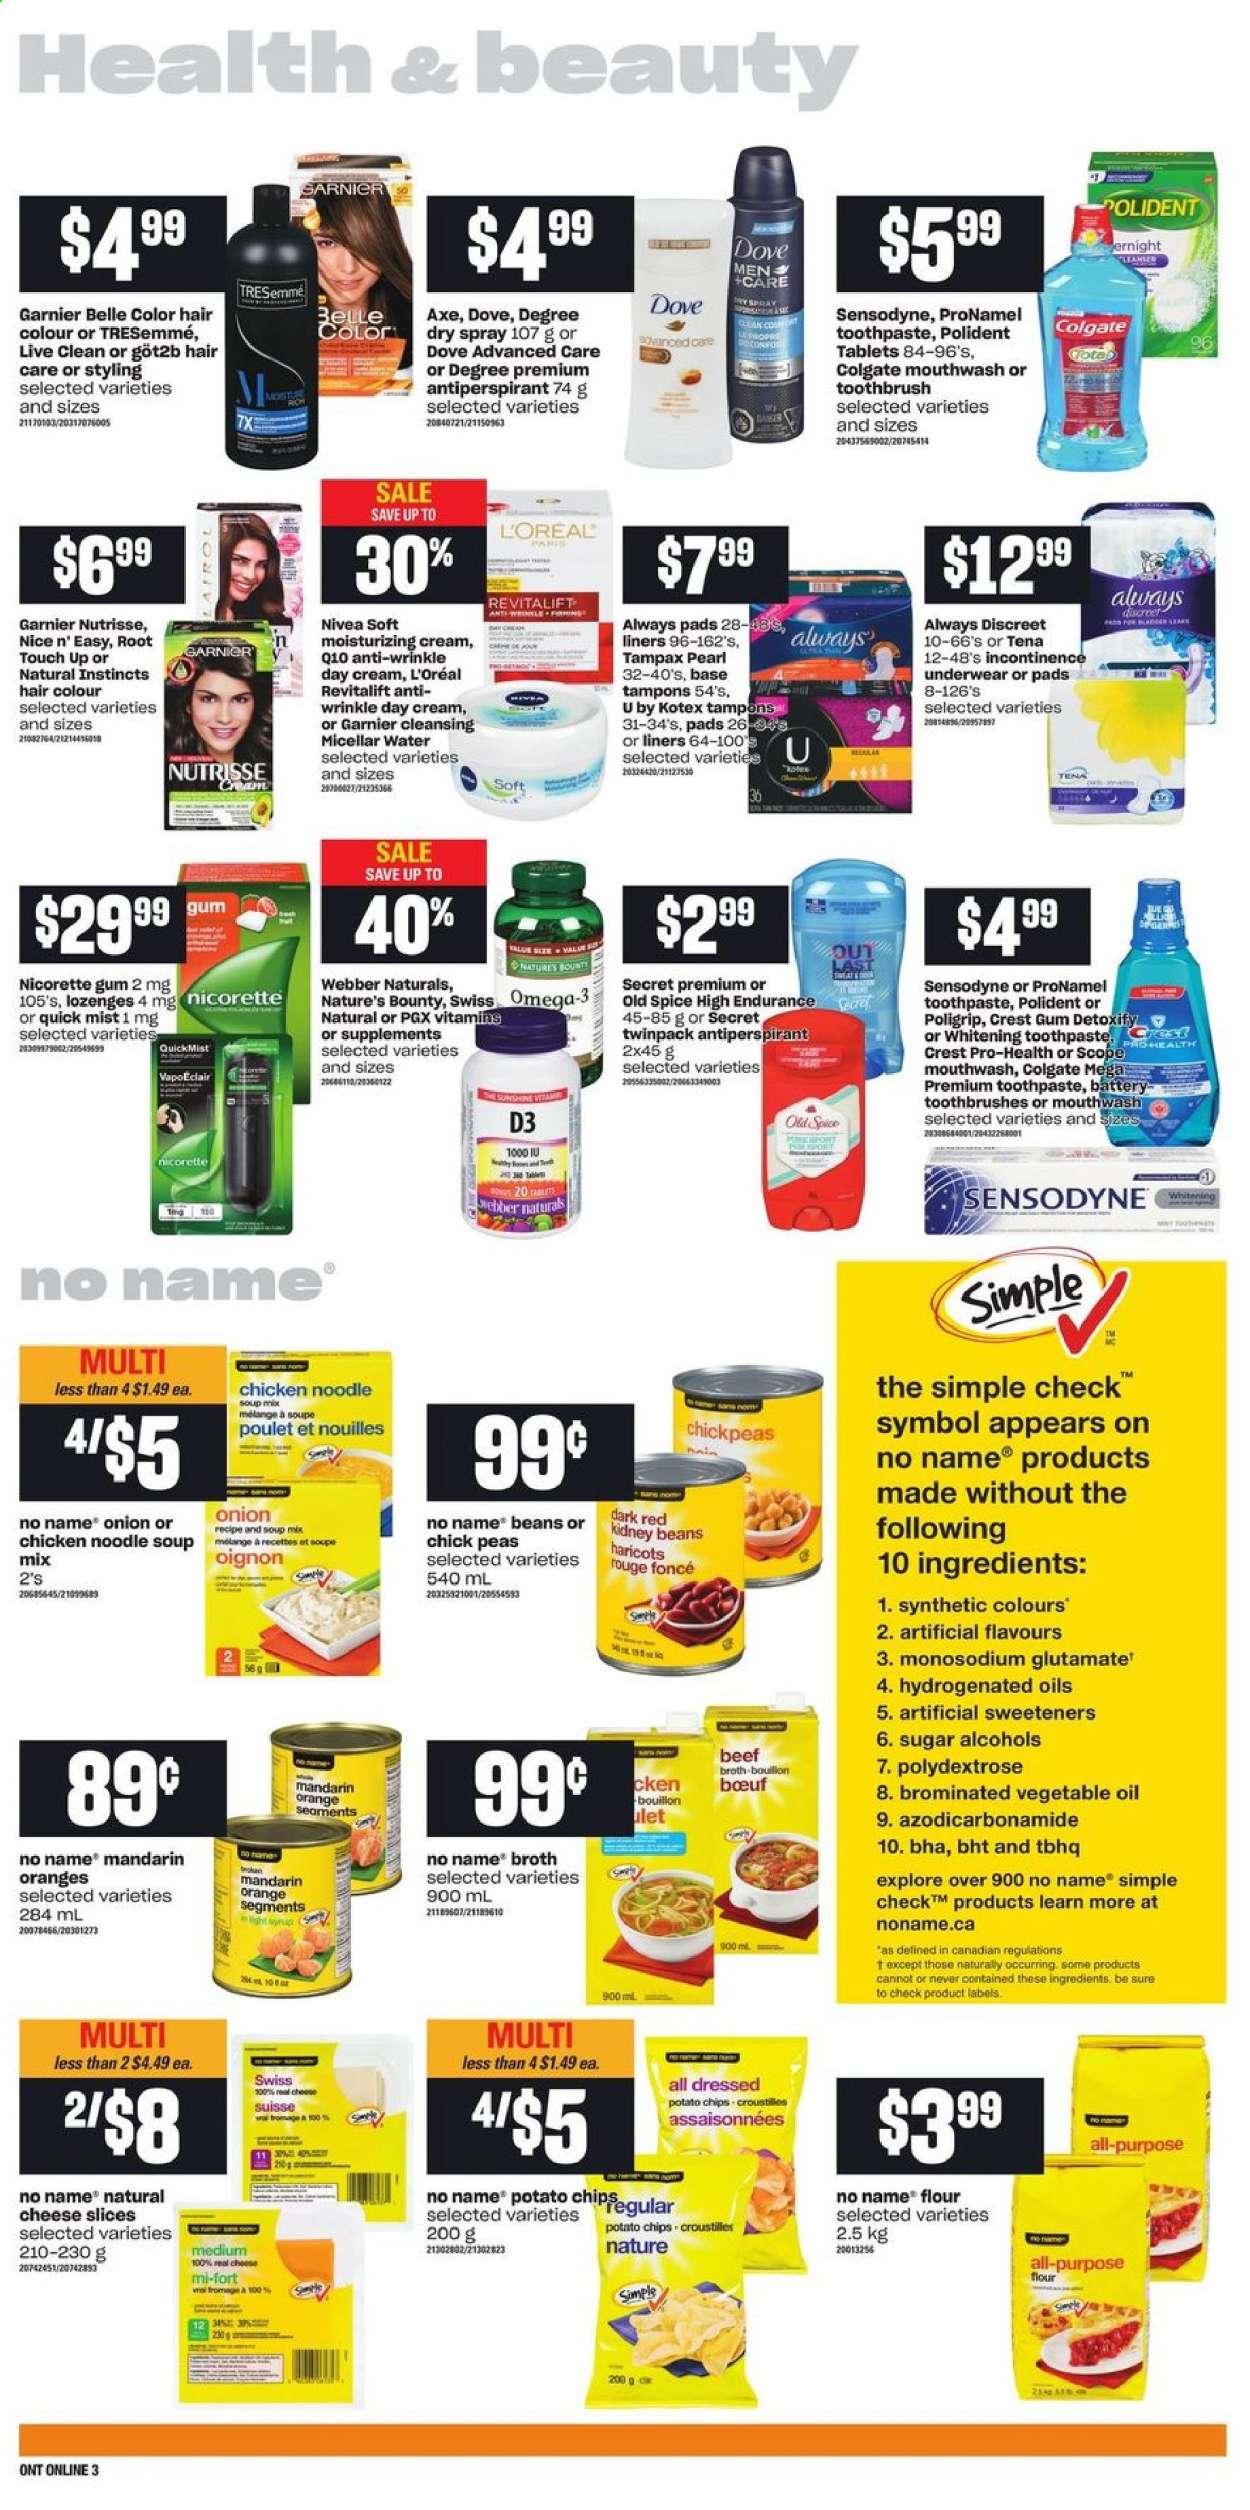 thumbnail - Independent Flyer - January 14, 2021 - January 20, 2021 - Sales products - mandarines, No Name, soup mix, soup, noodles cup, noodles, sliced cheese, cheese, potato chips, bouillon, flour, sugar, broth, kidney beans, chickpeas, spice, vegetable oil, oil, toothbrush, toothpaste, mouthwash, Polident, Crest, Always pads, Always Discreet, Kotex, incontinence underwear, tampons, day cream, L’Oréal, micellar water, TRESemmé, hair color, anti-perspirant, Sure, battery, Nature's Bounty, Nicorette, Omega-3, Nicorette Gum, vitamin D3, Garnier, Tampax, Nivea, Old Spice, chips, Sensodyne. Page 7.